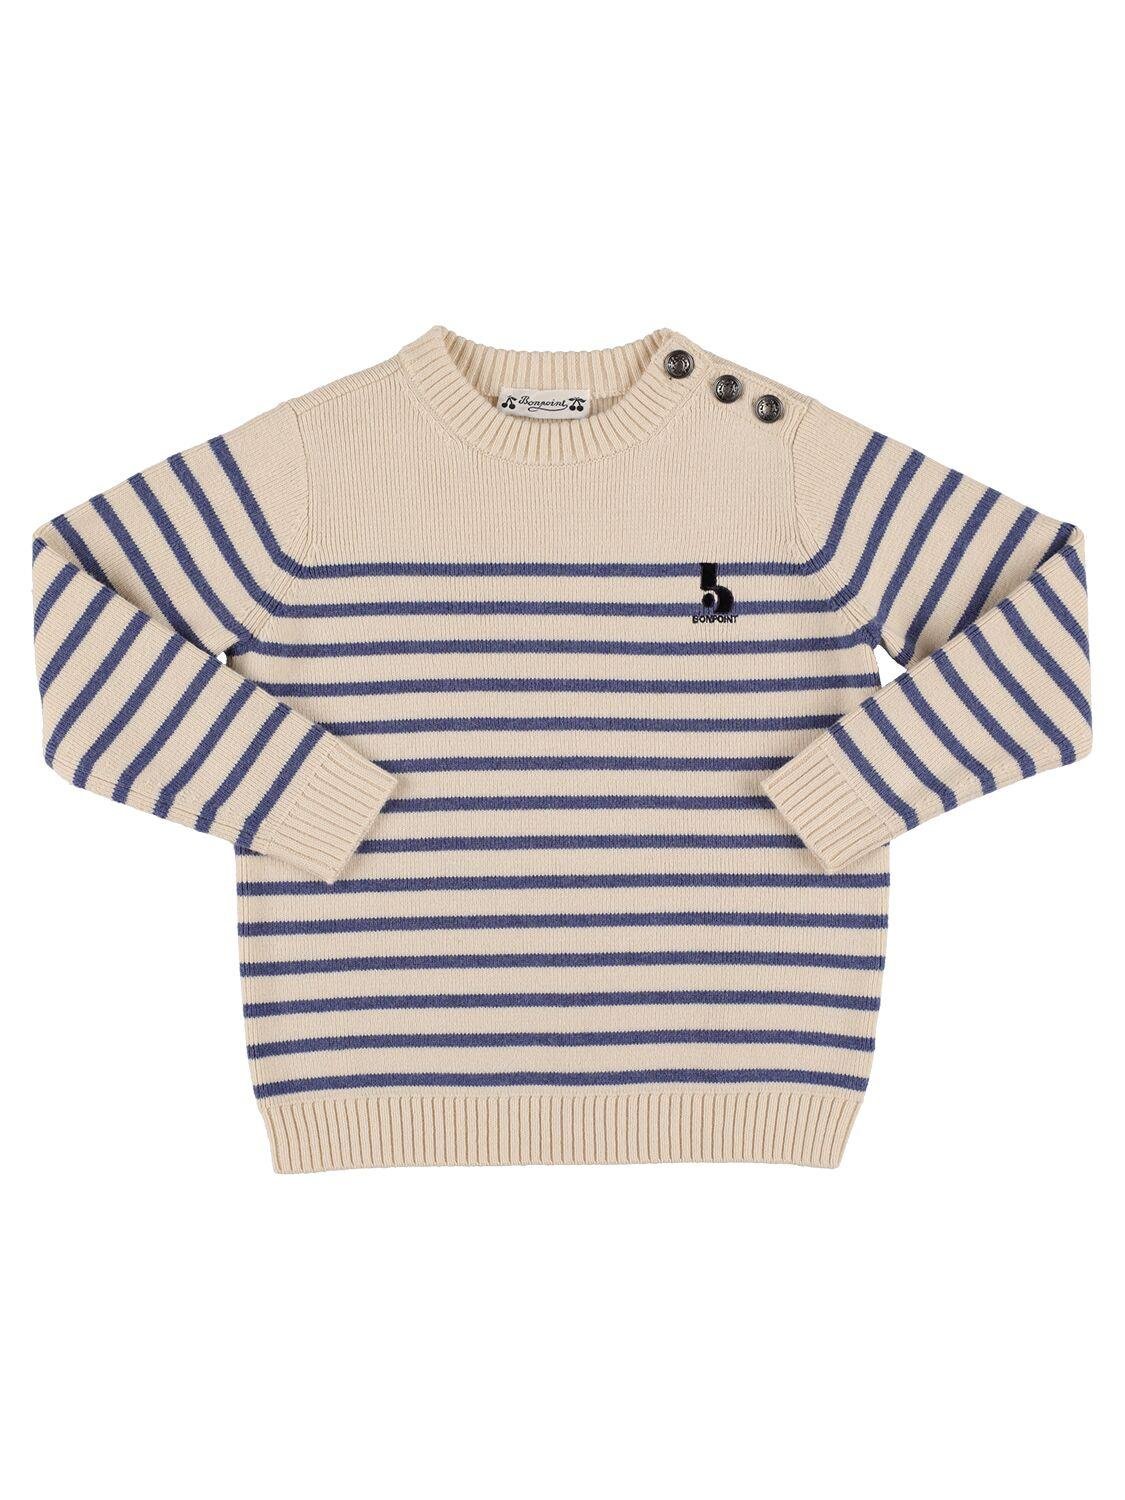 Striped Cotton & Wool Knit Sweater by BONPOINT